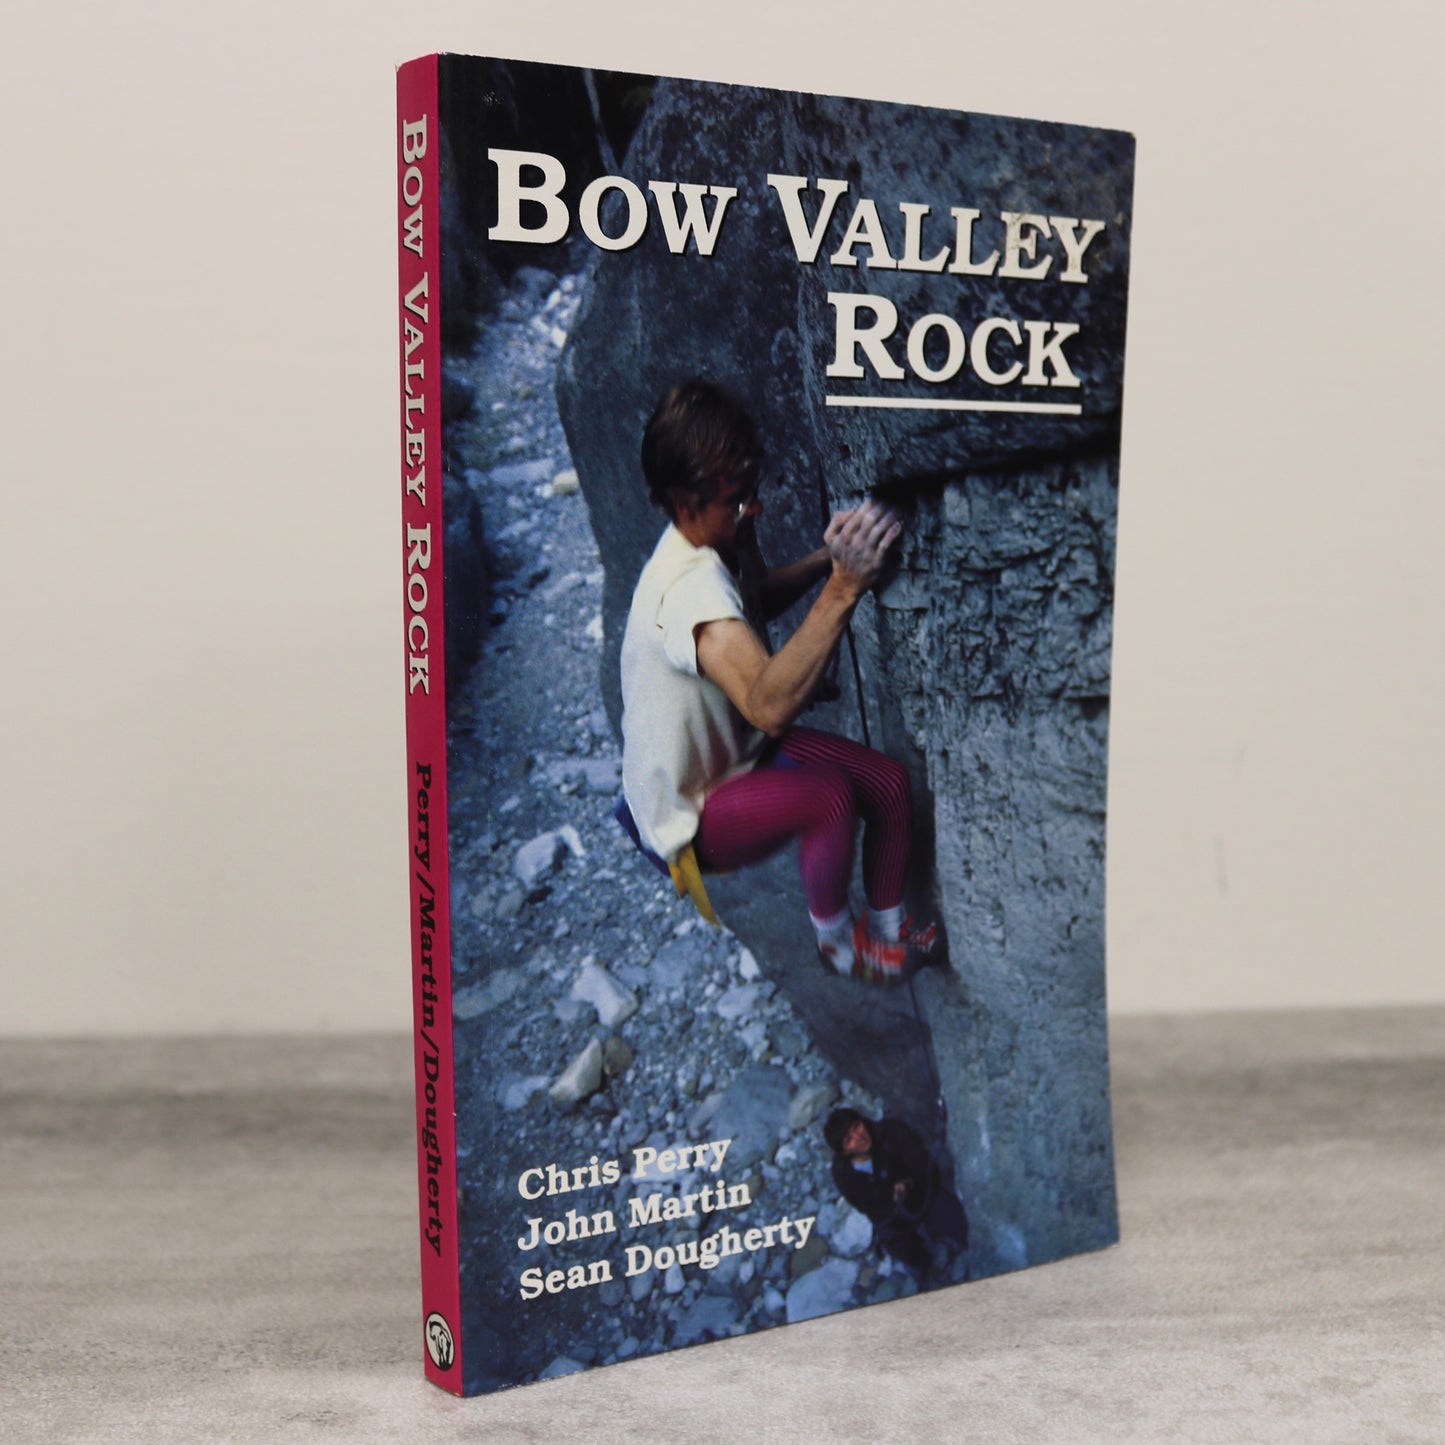 Bow Valley Rock Banff Canada Canadian Rockies Rocky Mountains Climbing Guide Book